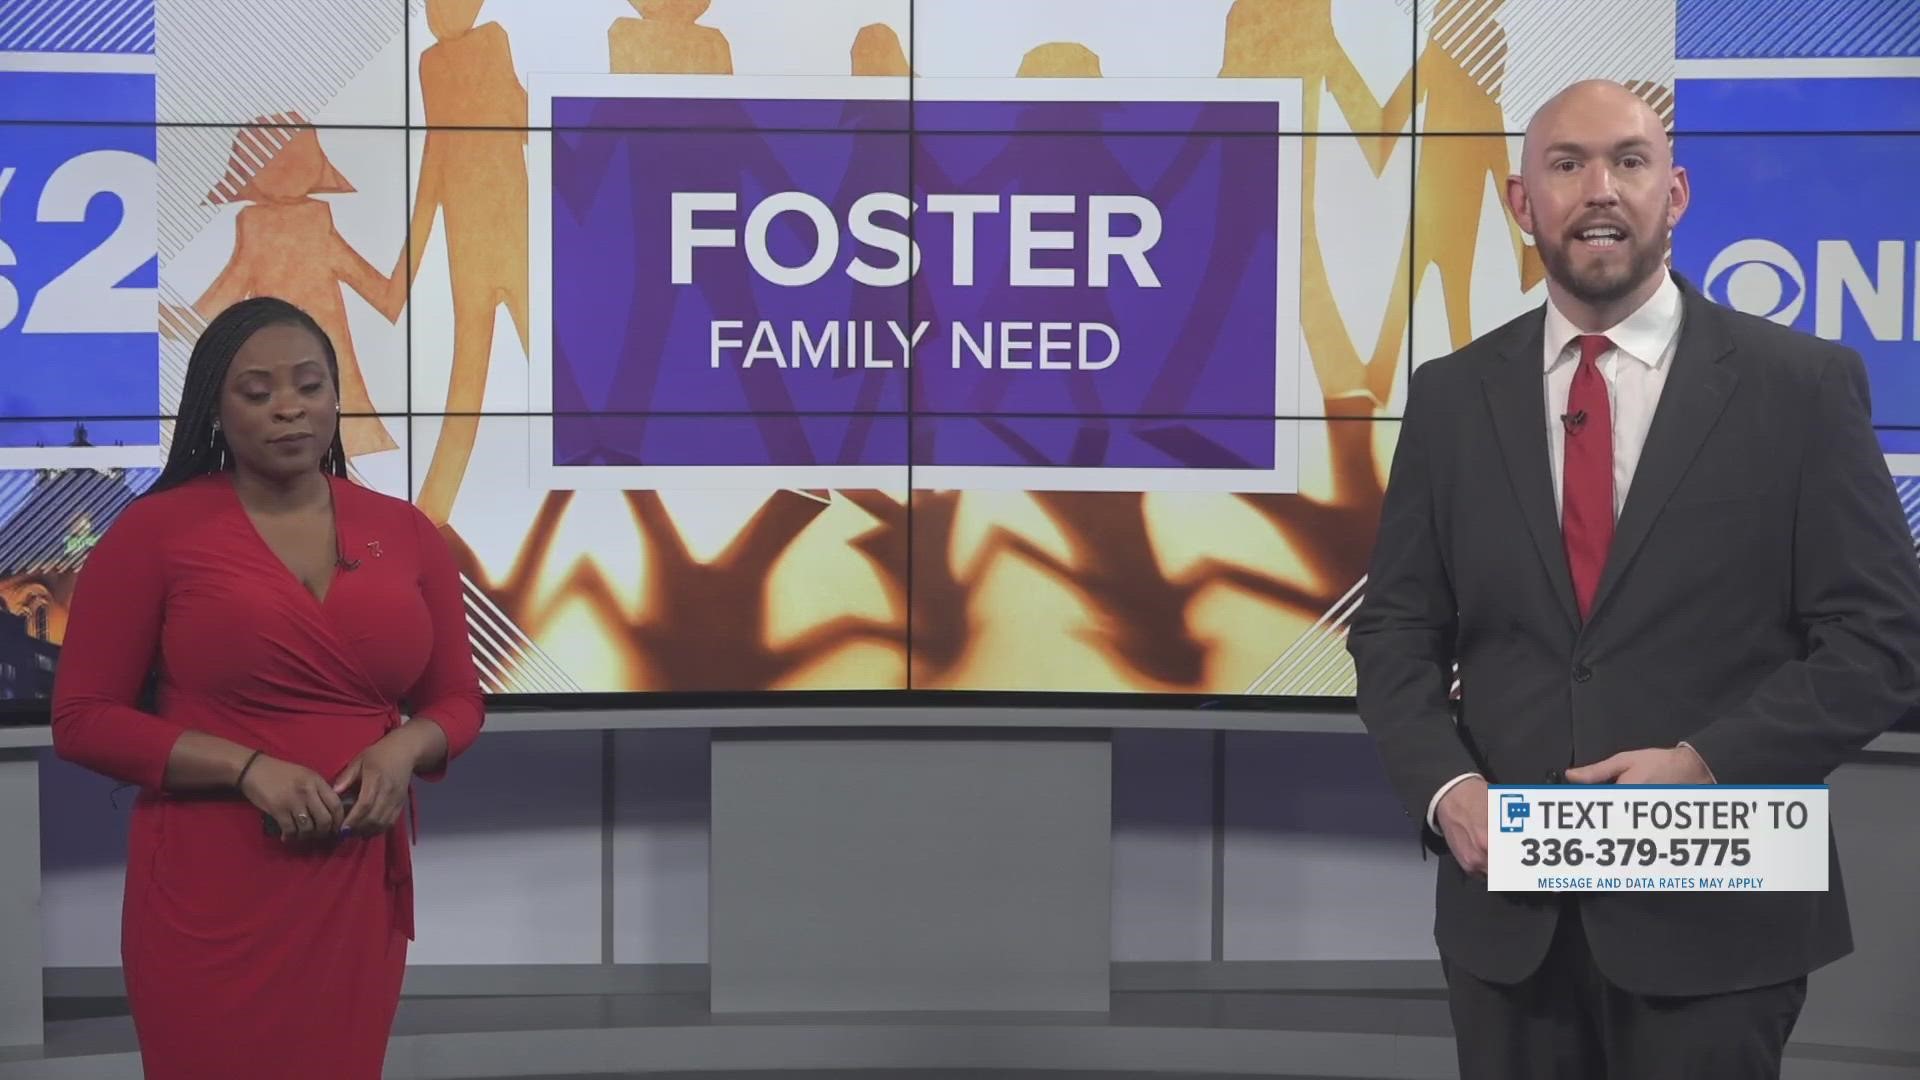 The Guilford County Department of Social Services is temporarily housing some foster children in office spaces. They say it’s because of a foster parent shortage.